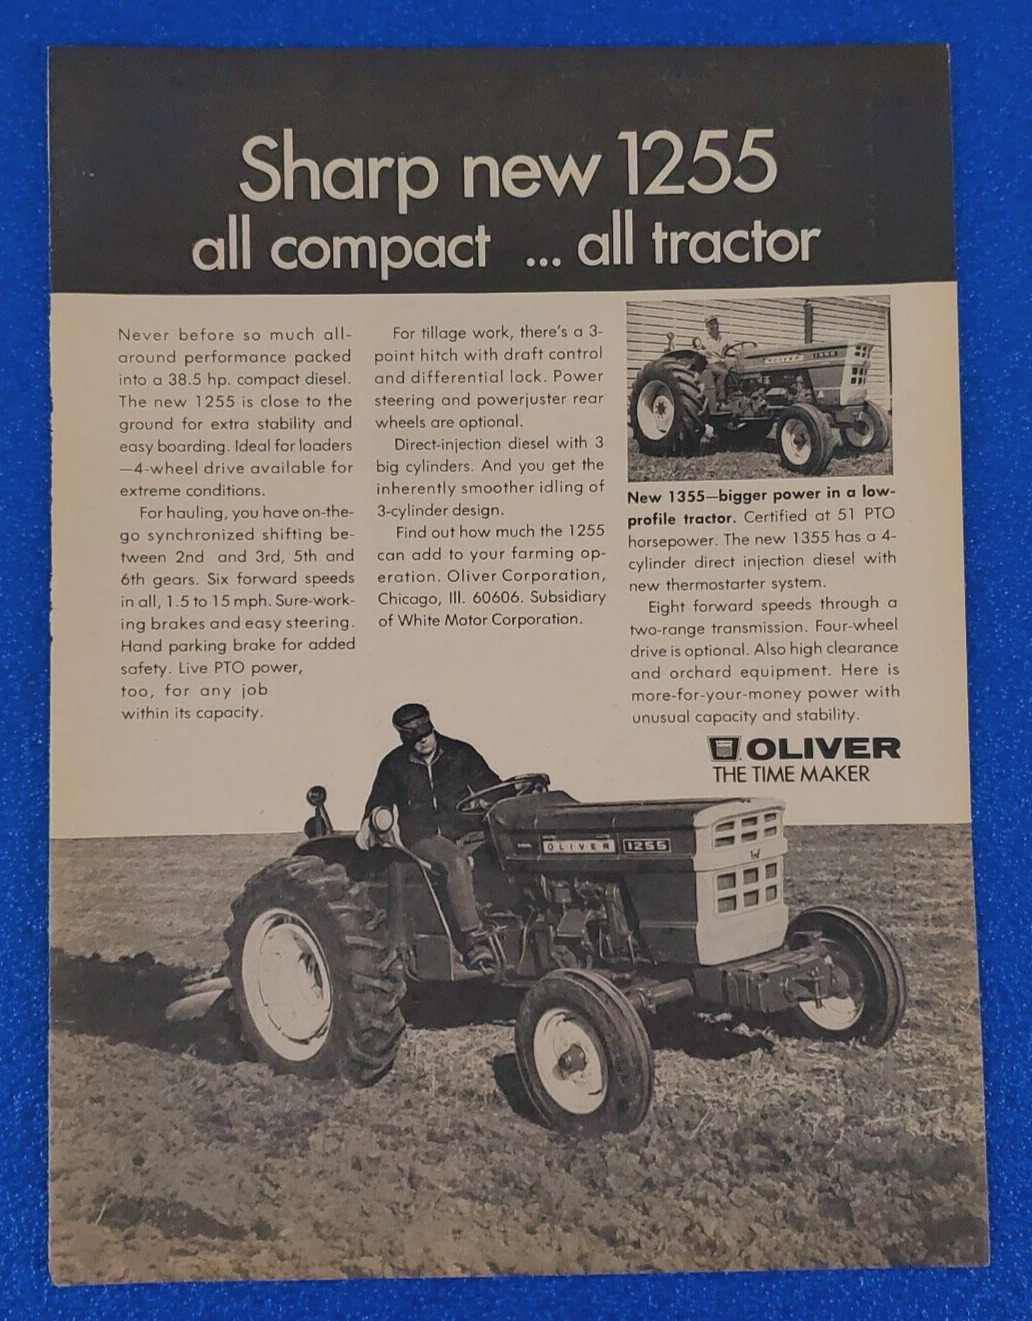 VINTAGE 1969 OLIVER 1255 TRACTOR CLASSIC AMERICAN ORIGINAL PRINT AD SHIPS FREE